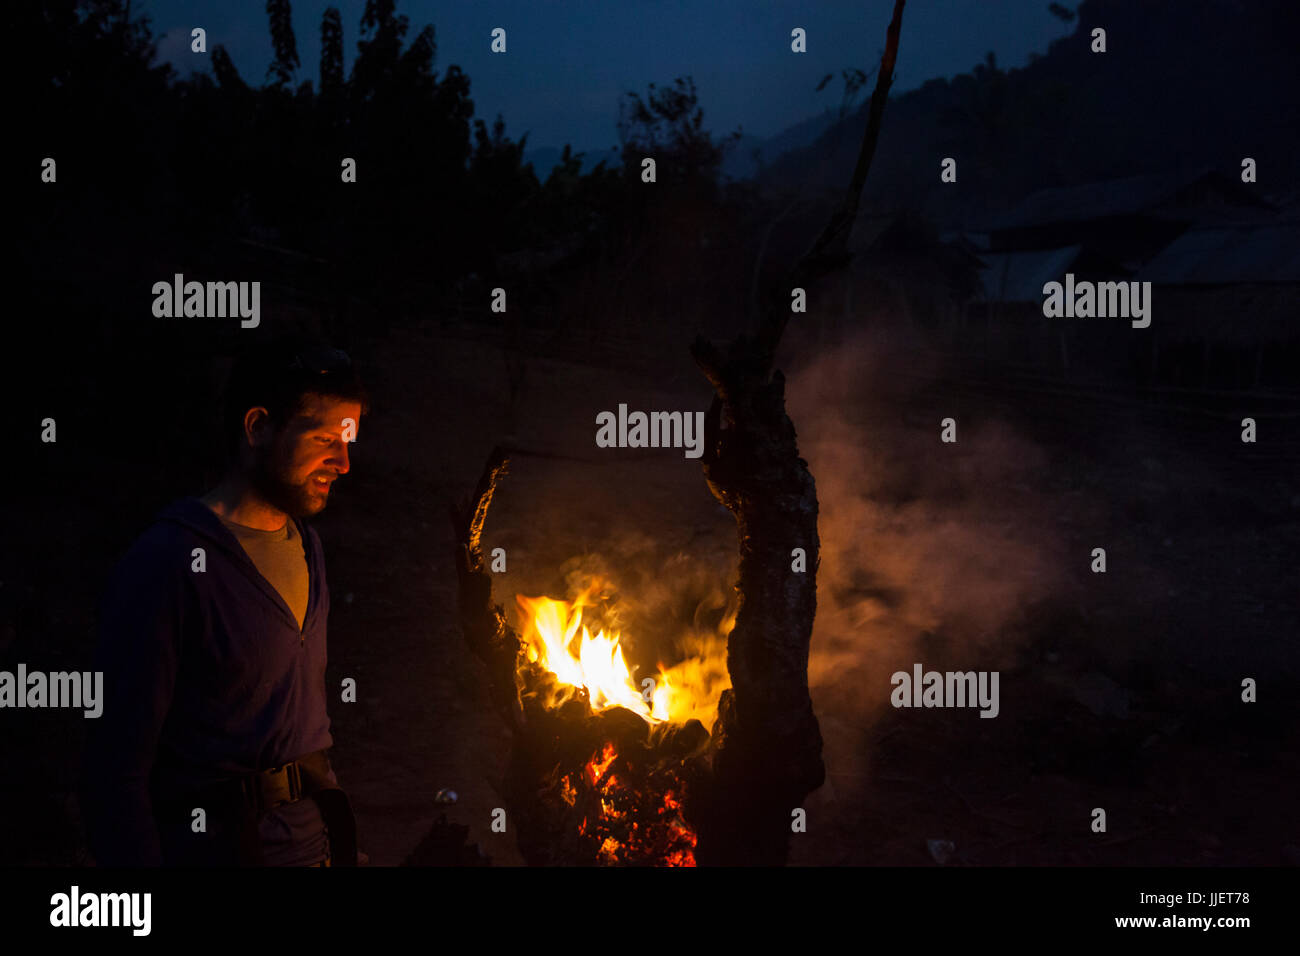 Robert Hahn peers into a fire burning in a tree stump on the outskirts of Muang Hat Hin, Laos. Stock Photo